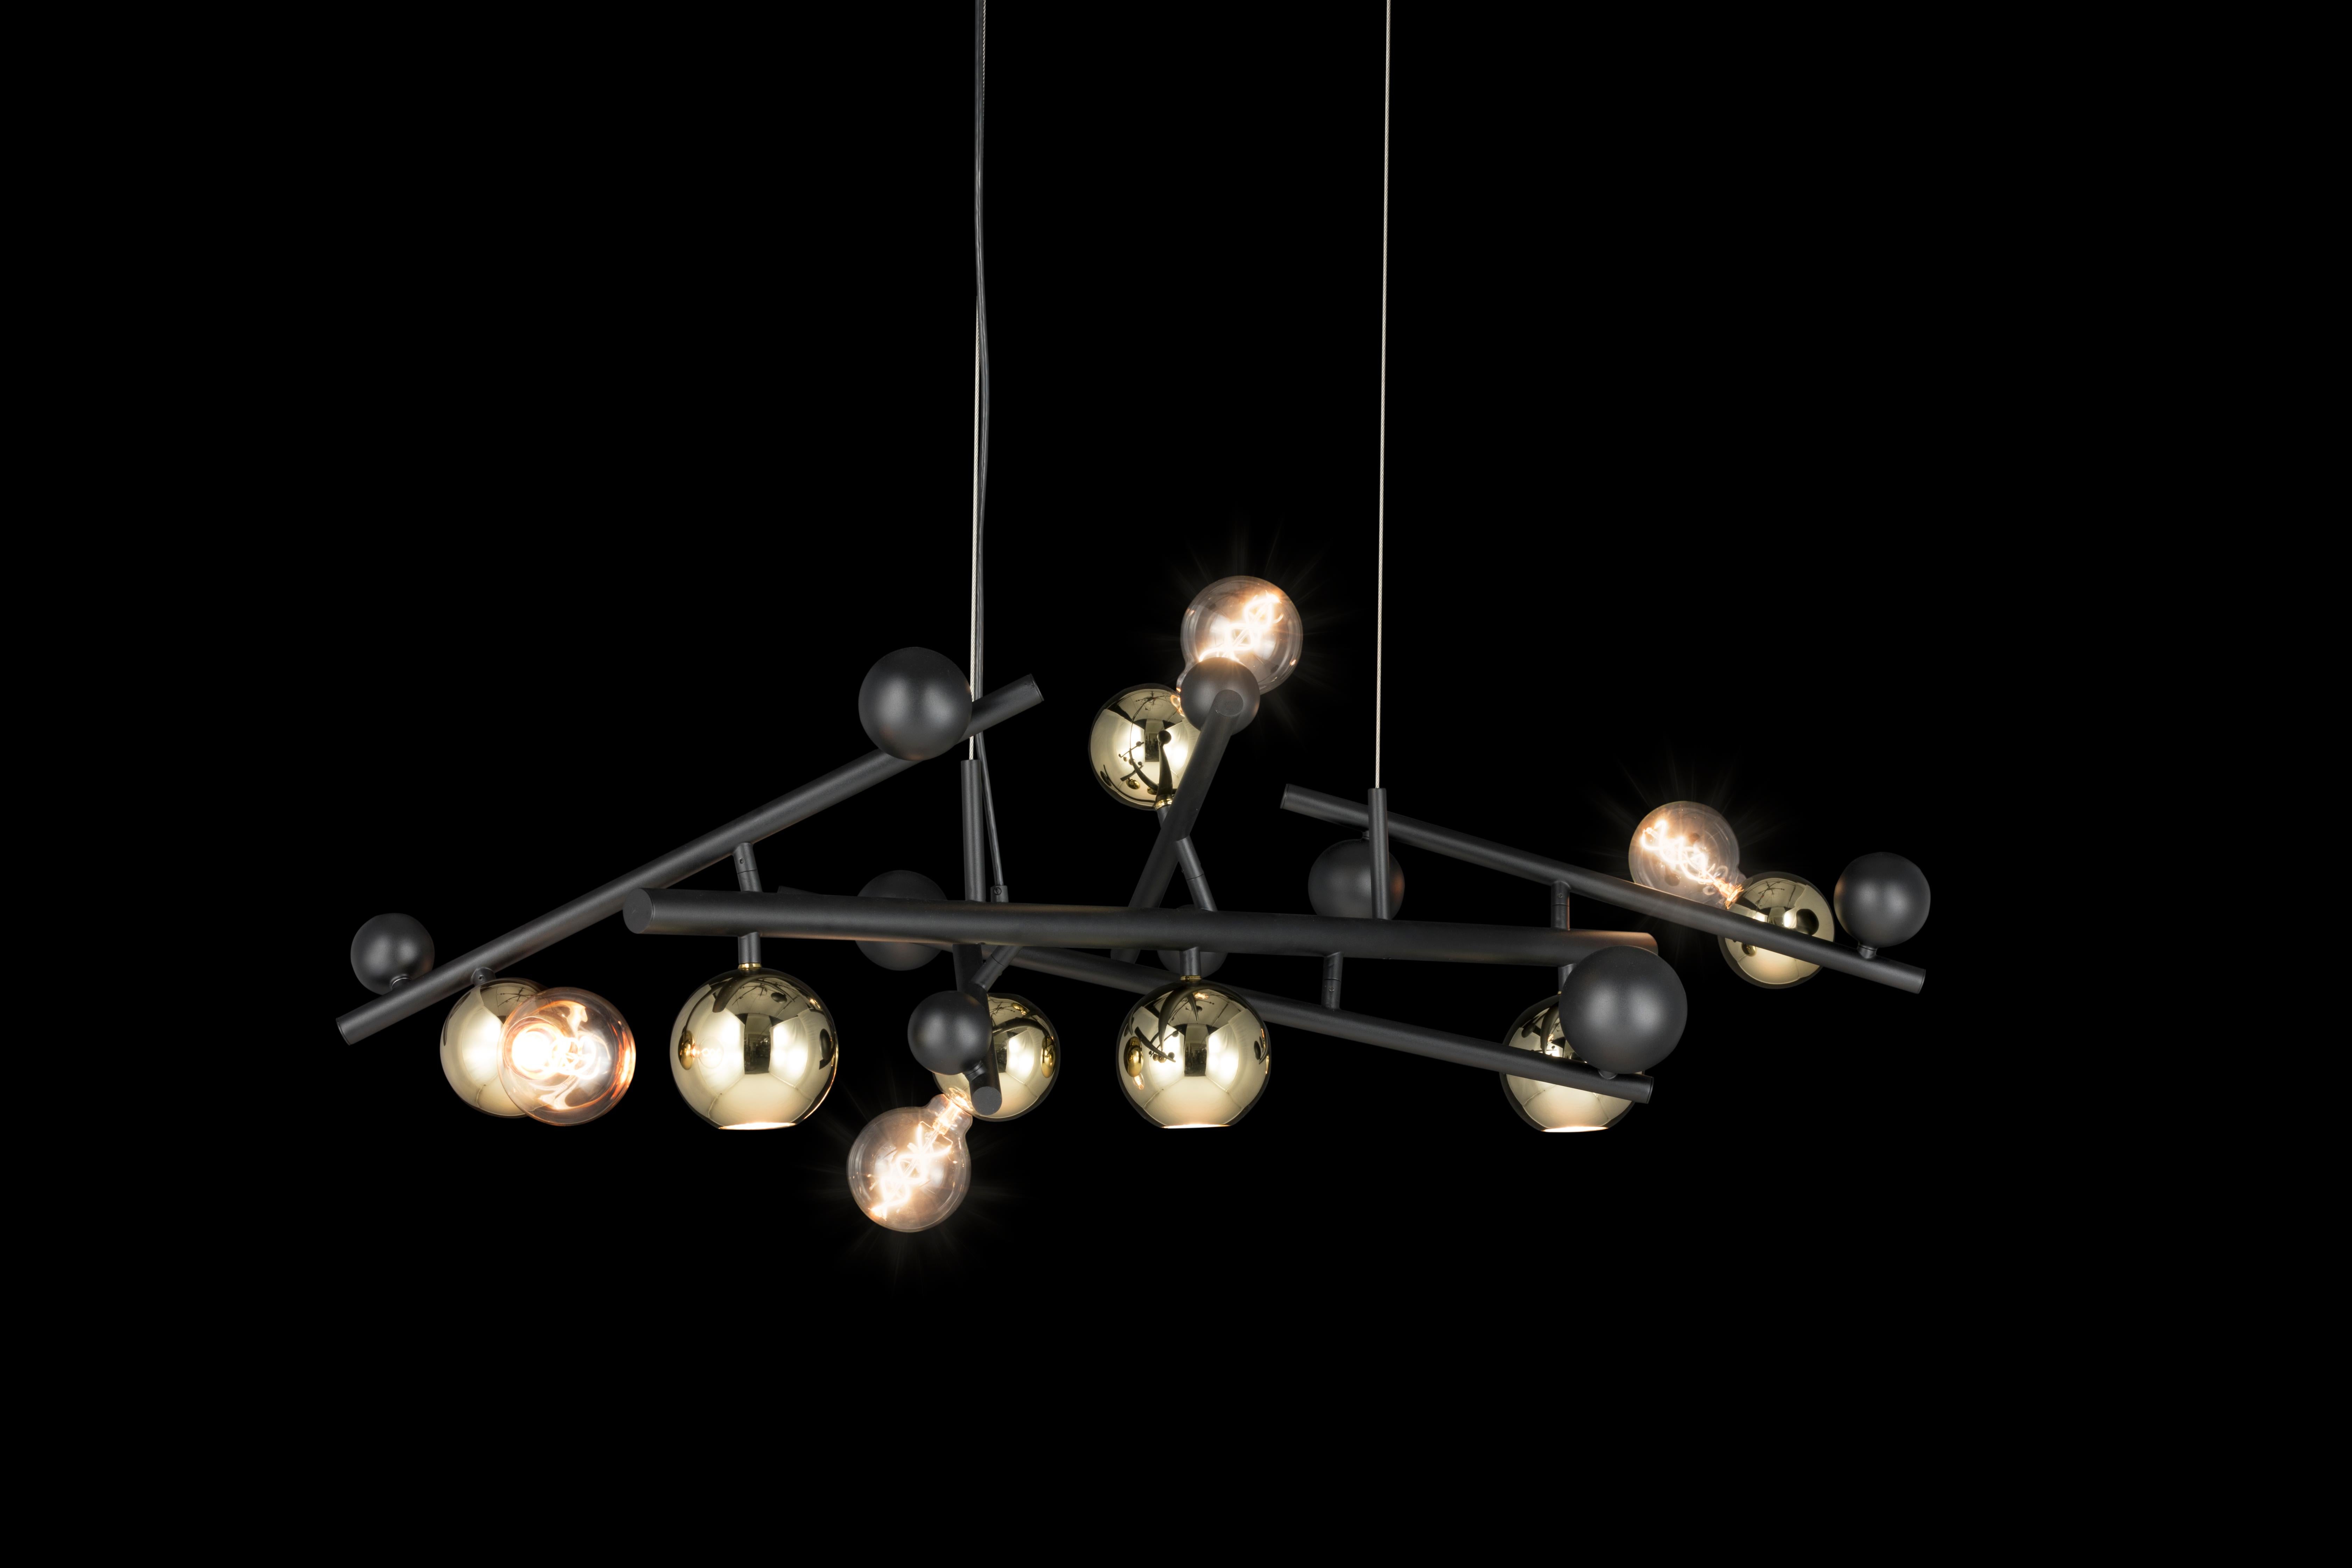 The Galaxy is modern pendant in a black matt finish with the globes in a different finish ans is designed by William Brand, founder of Brand van Egmond. Full of character and created to bring light above a table, the pendant is available in 5